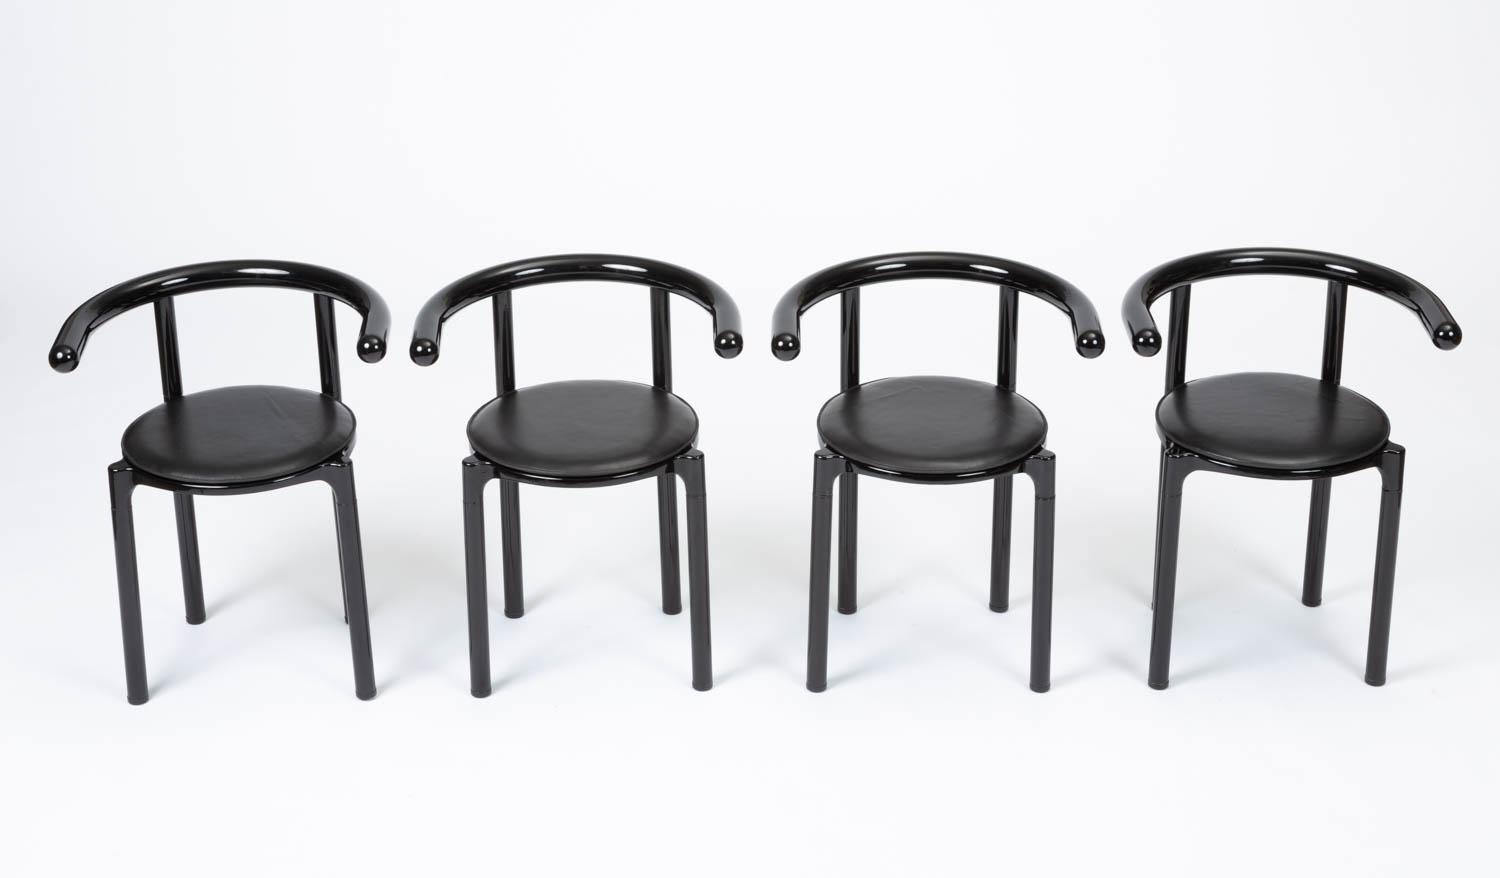 A set of four late modernist dining chairs from Italian design house Kartell. The 4855 model is a rarer edition of seating, designed in 1981 by the company’s co-founder and Art Director, Anna Castelli Ferrieri. Each chair has a round leather seat on